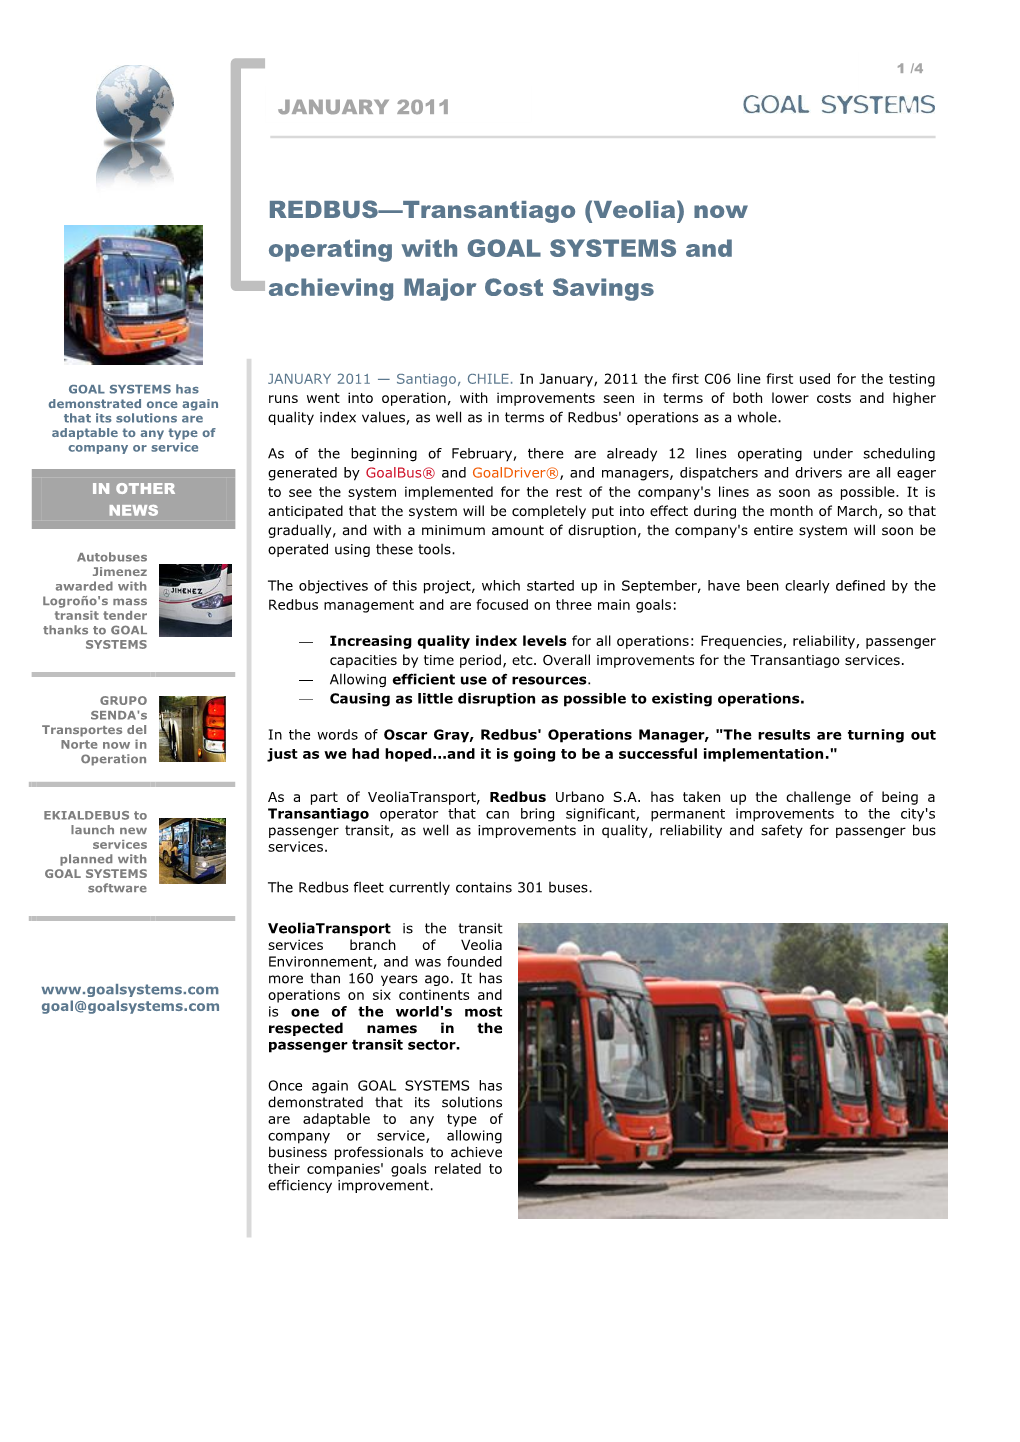 REDBUS—Transantiago (Veolia) Now Operating with GOAL SYSTEMS and Achieving Major Cost Savings